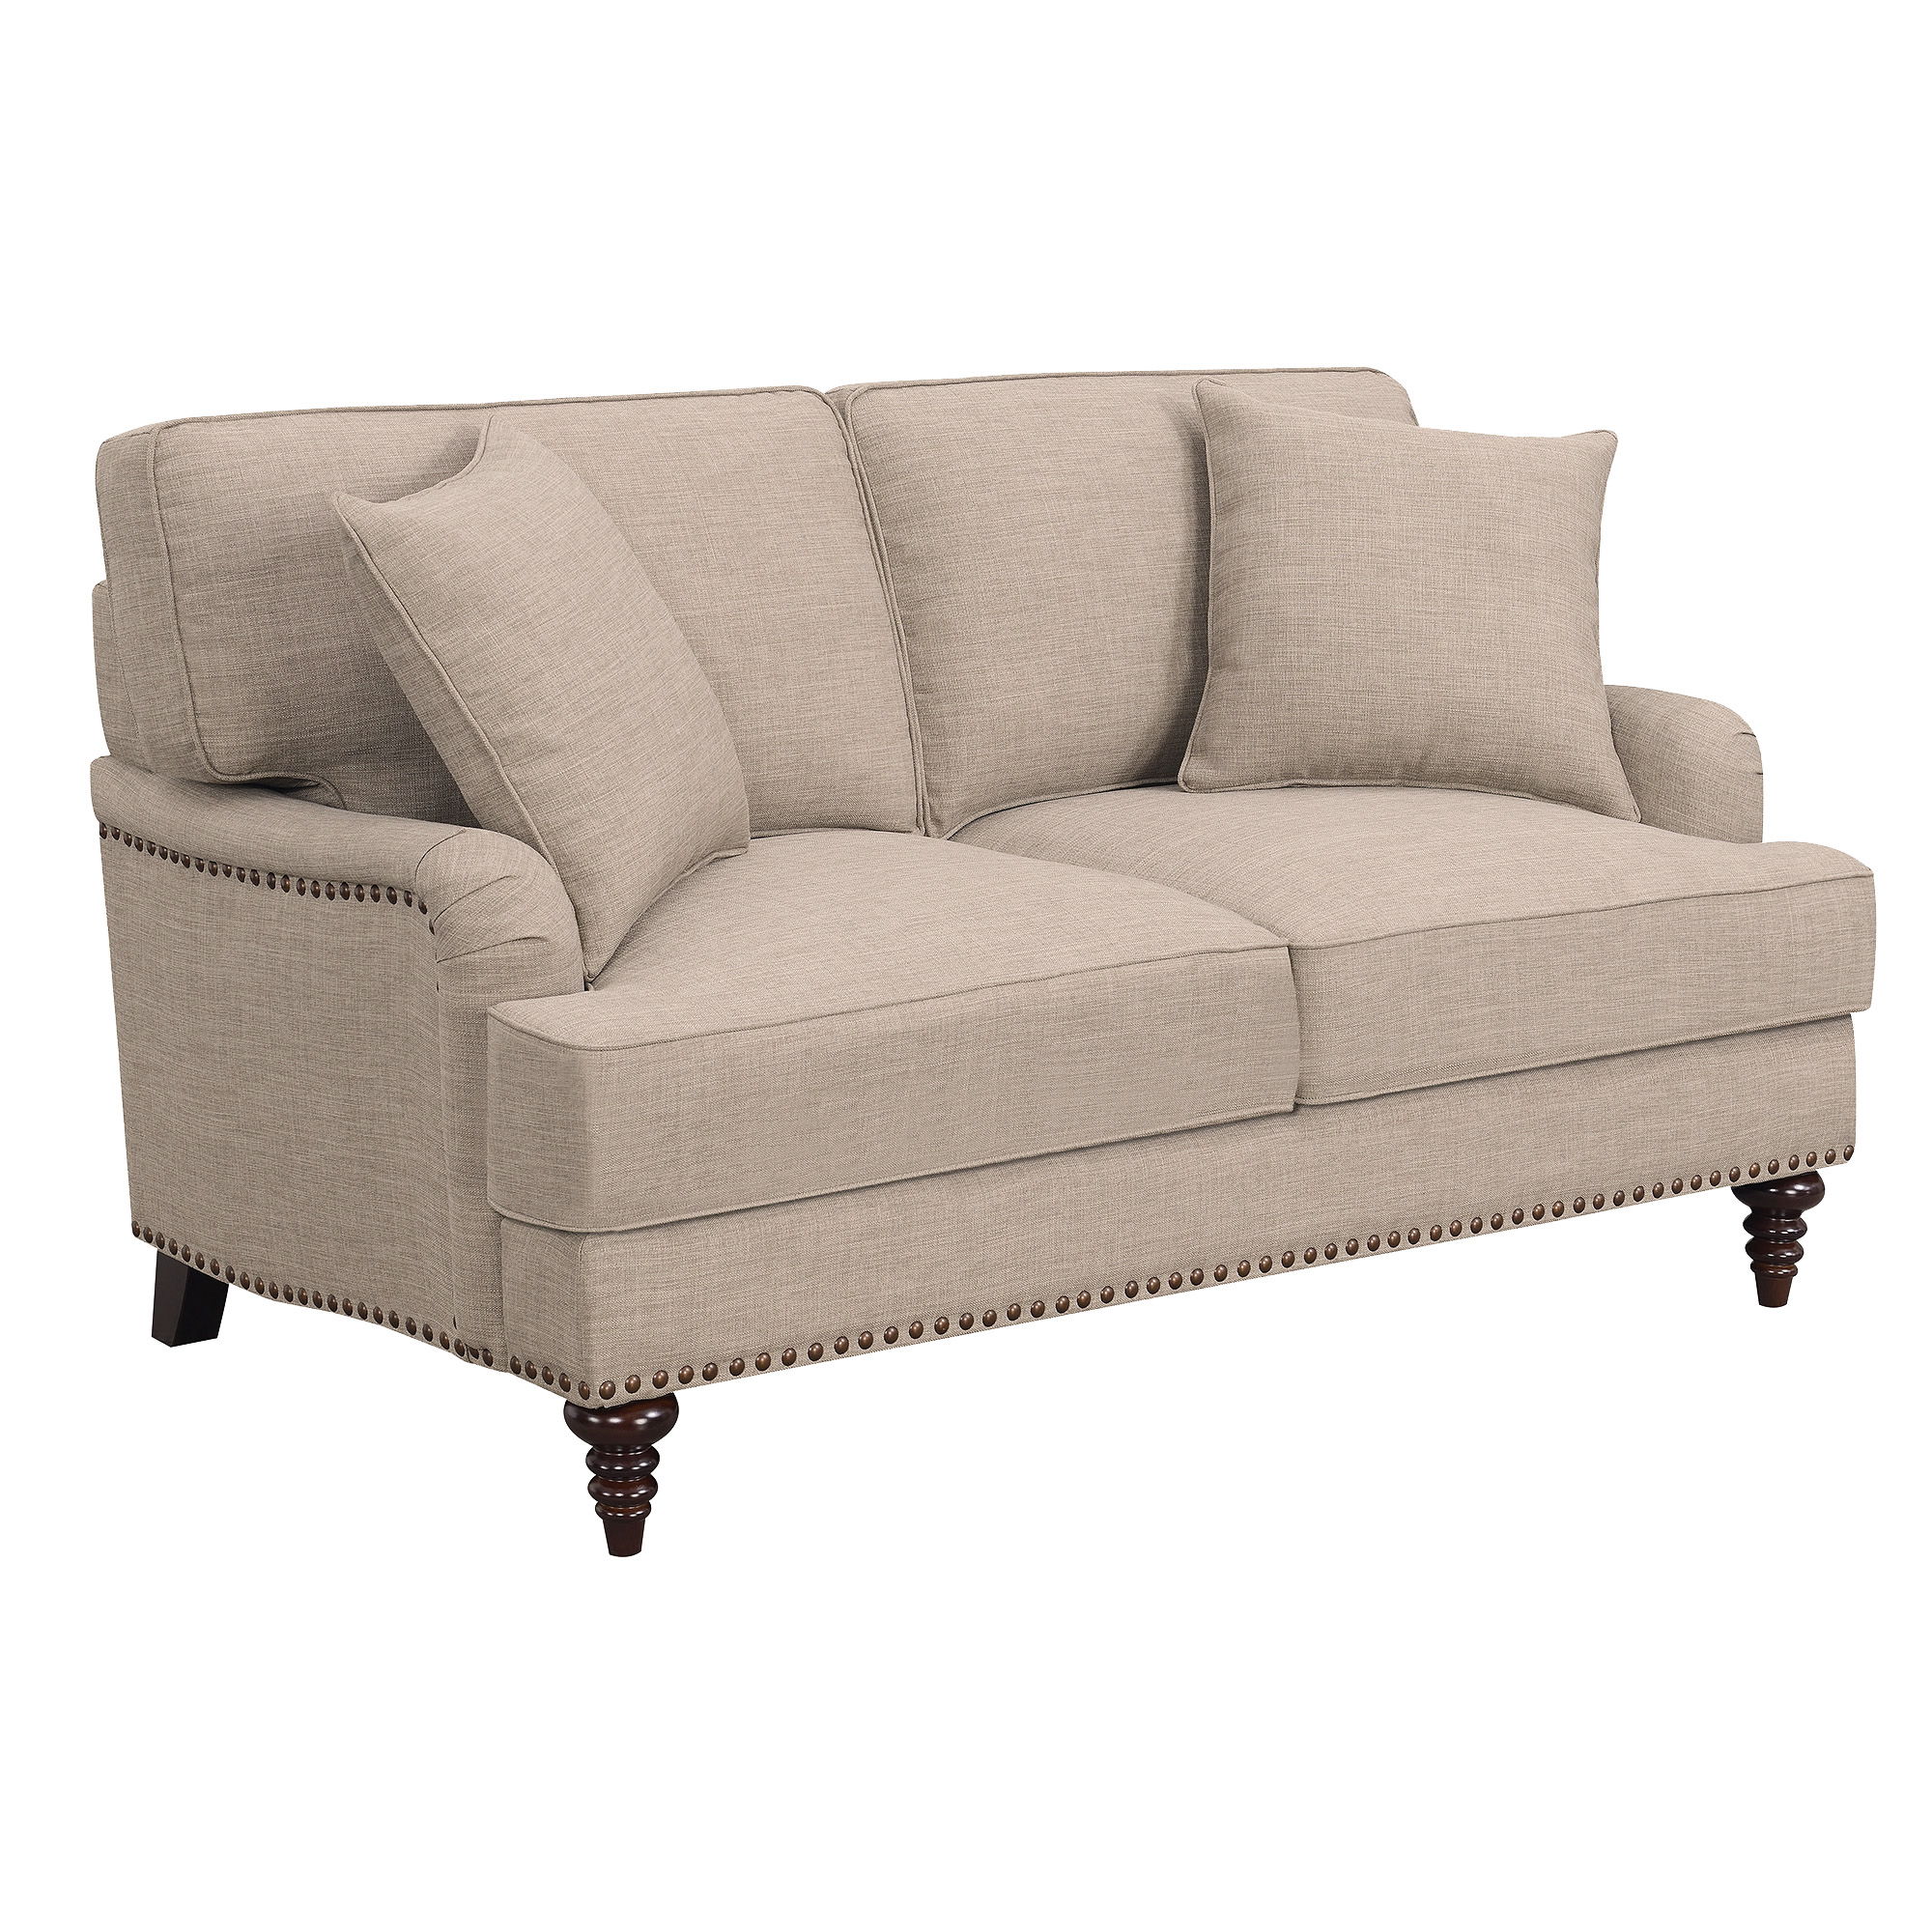 Abby Loveseat W/Pillows in Heirloom Smoke / Pewter